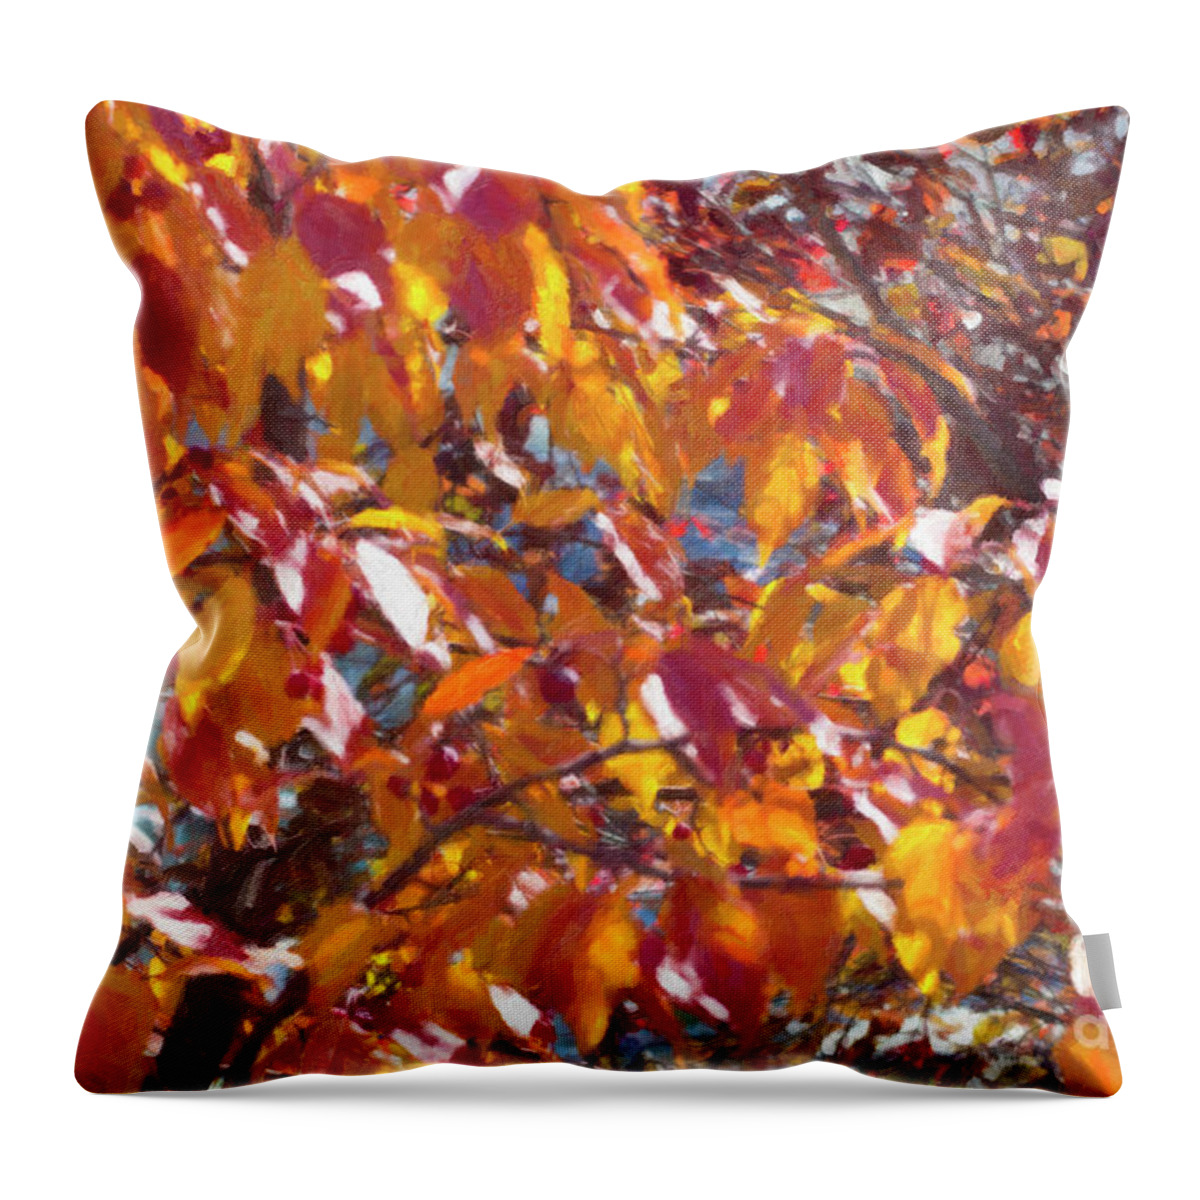 Fall Branches Throw Pillow featuring the digital art Fall Branches Paint by Donna L Munro